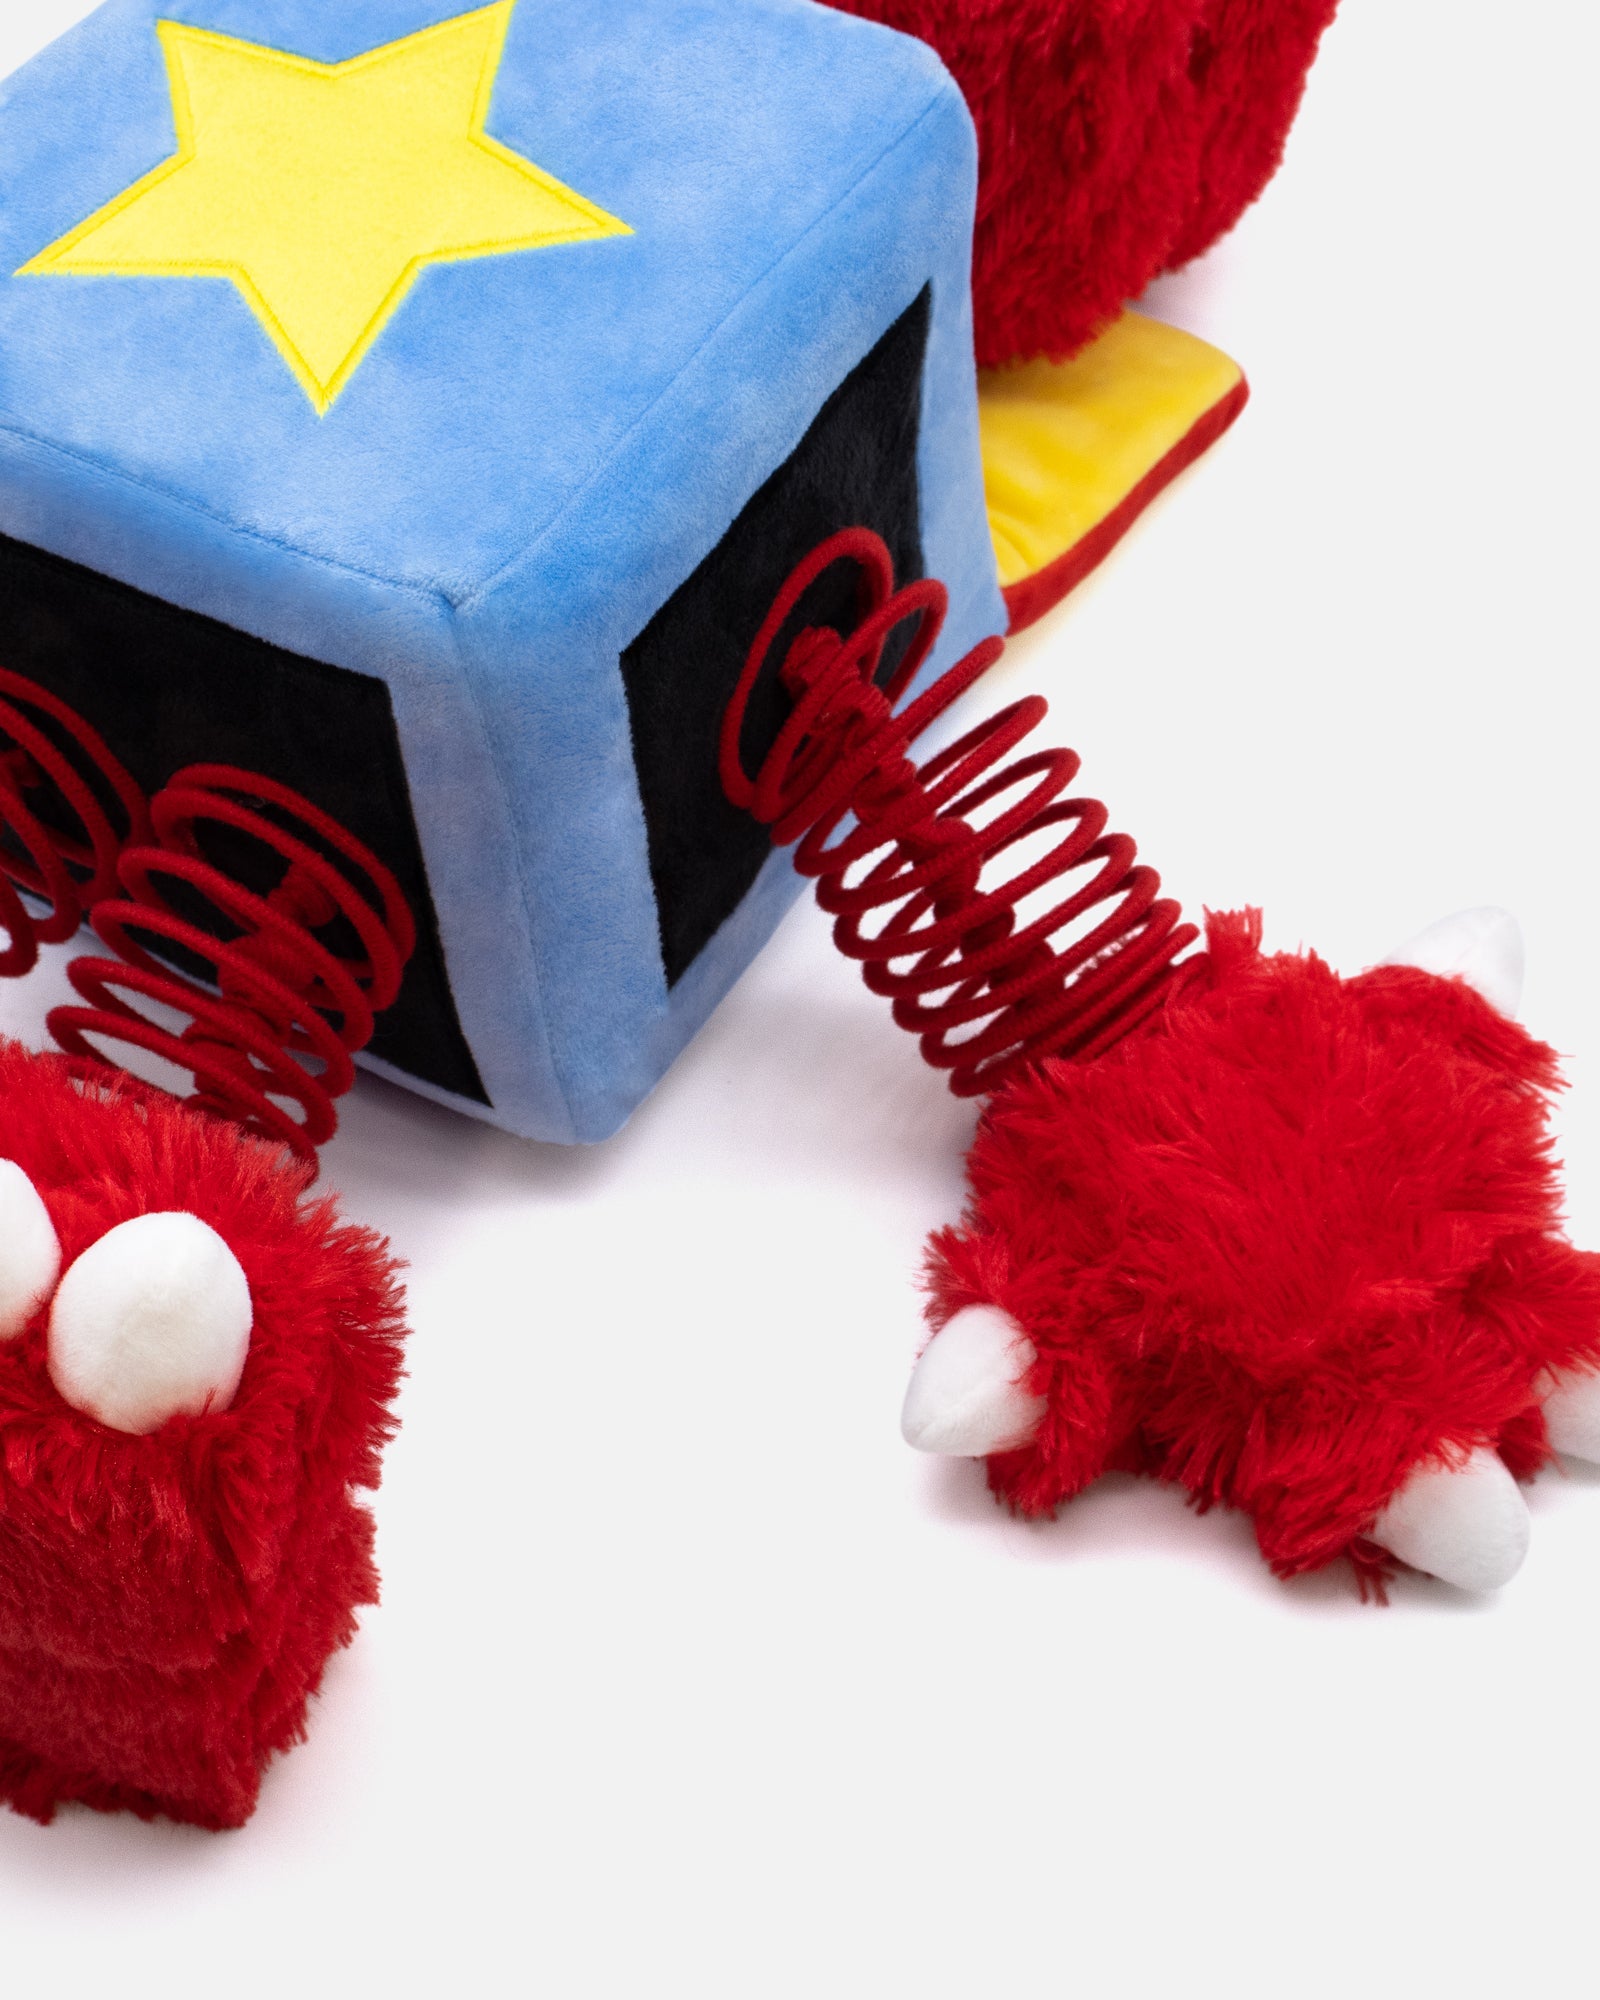 boxy boo poppy playtime plush close up of springs on arms and legs